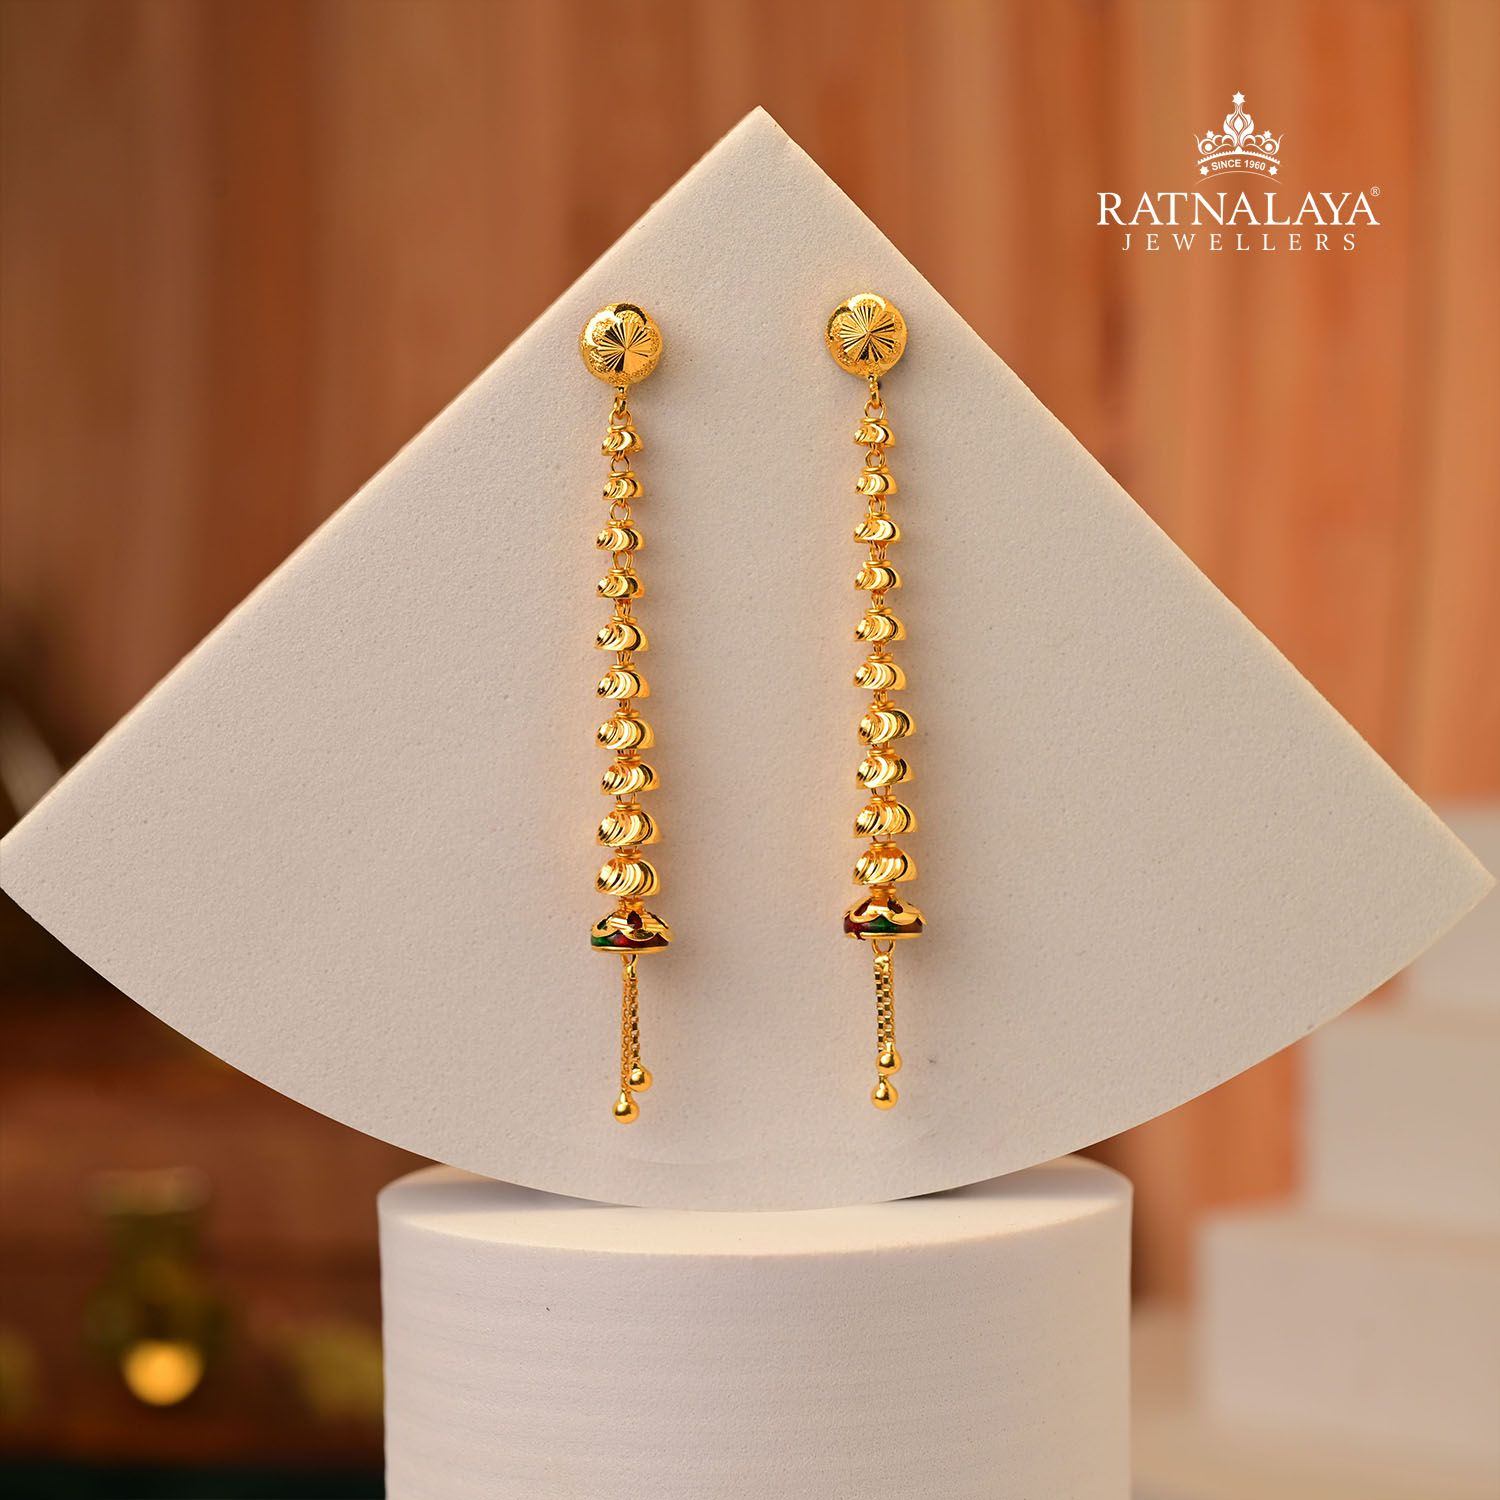 Lovely Two-Tone Circle 22k Gold Earrings – Andaaz Jewelers